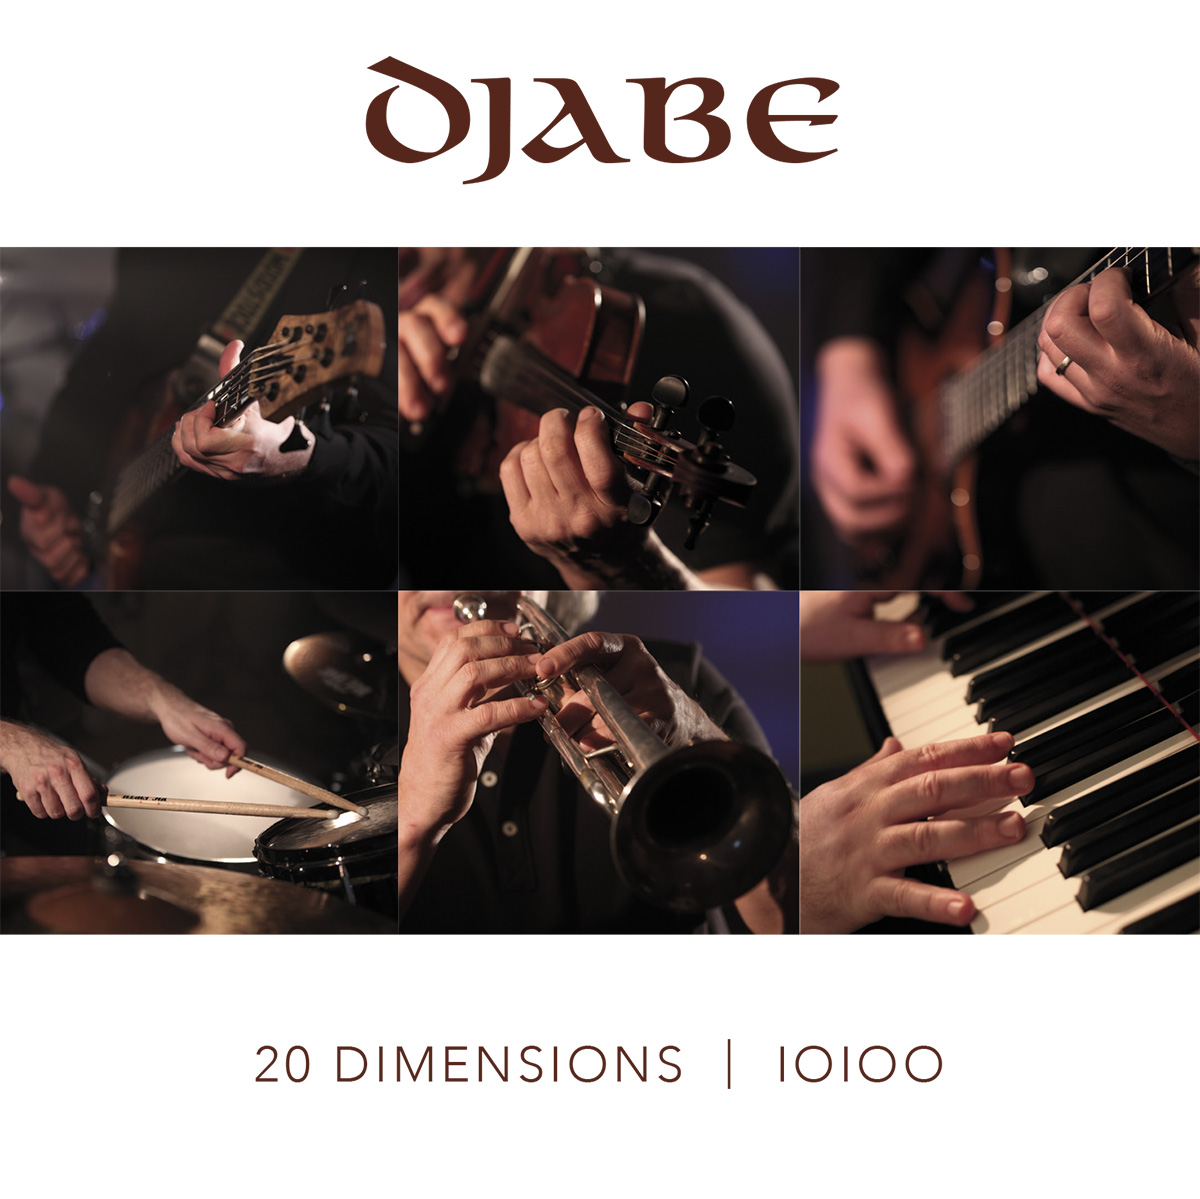 djabe_20_dimensions_cover_1200.jpg